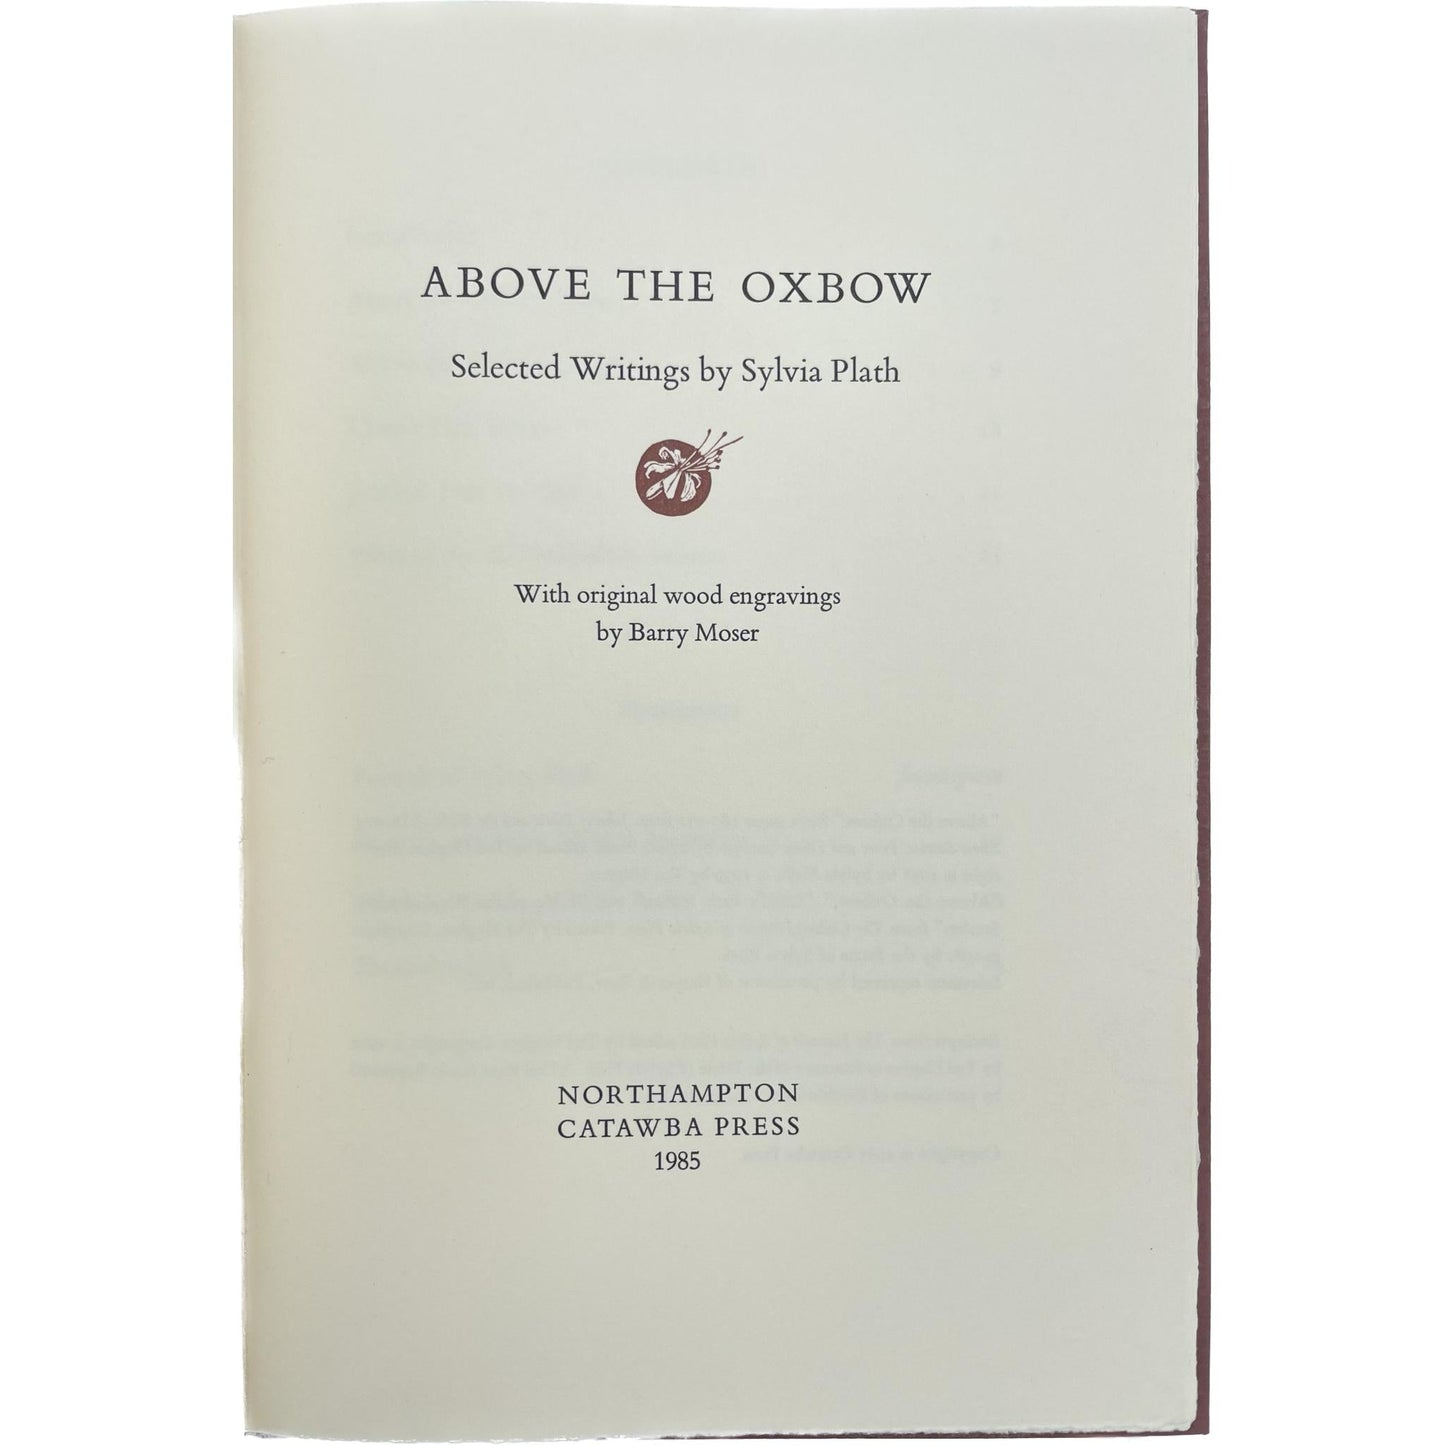 Above the Oxbow: Selected Writings by Sylvia Plath